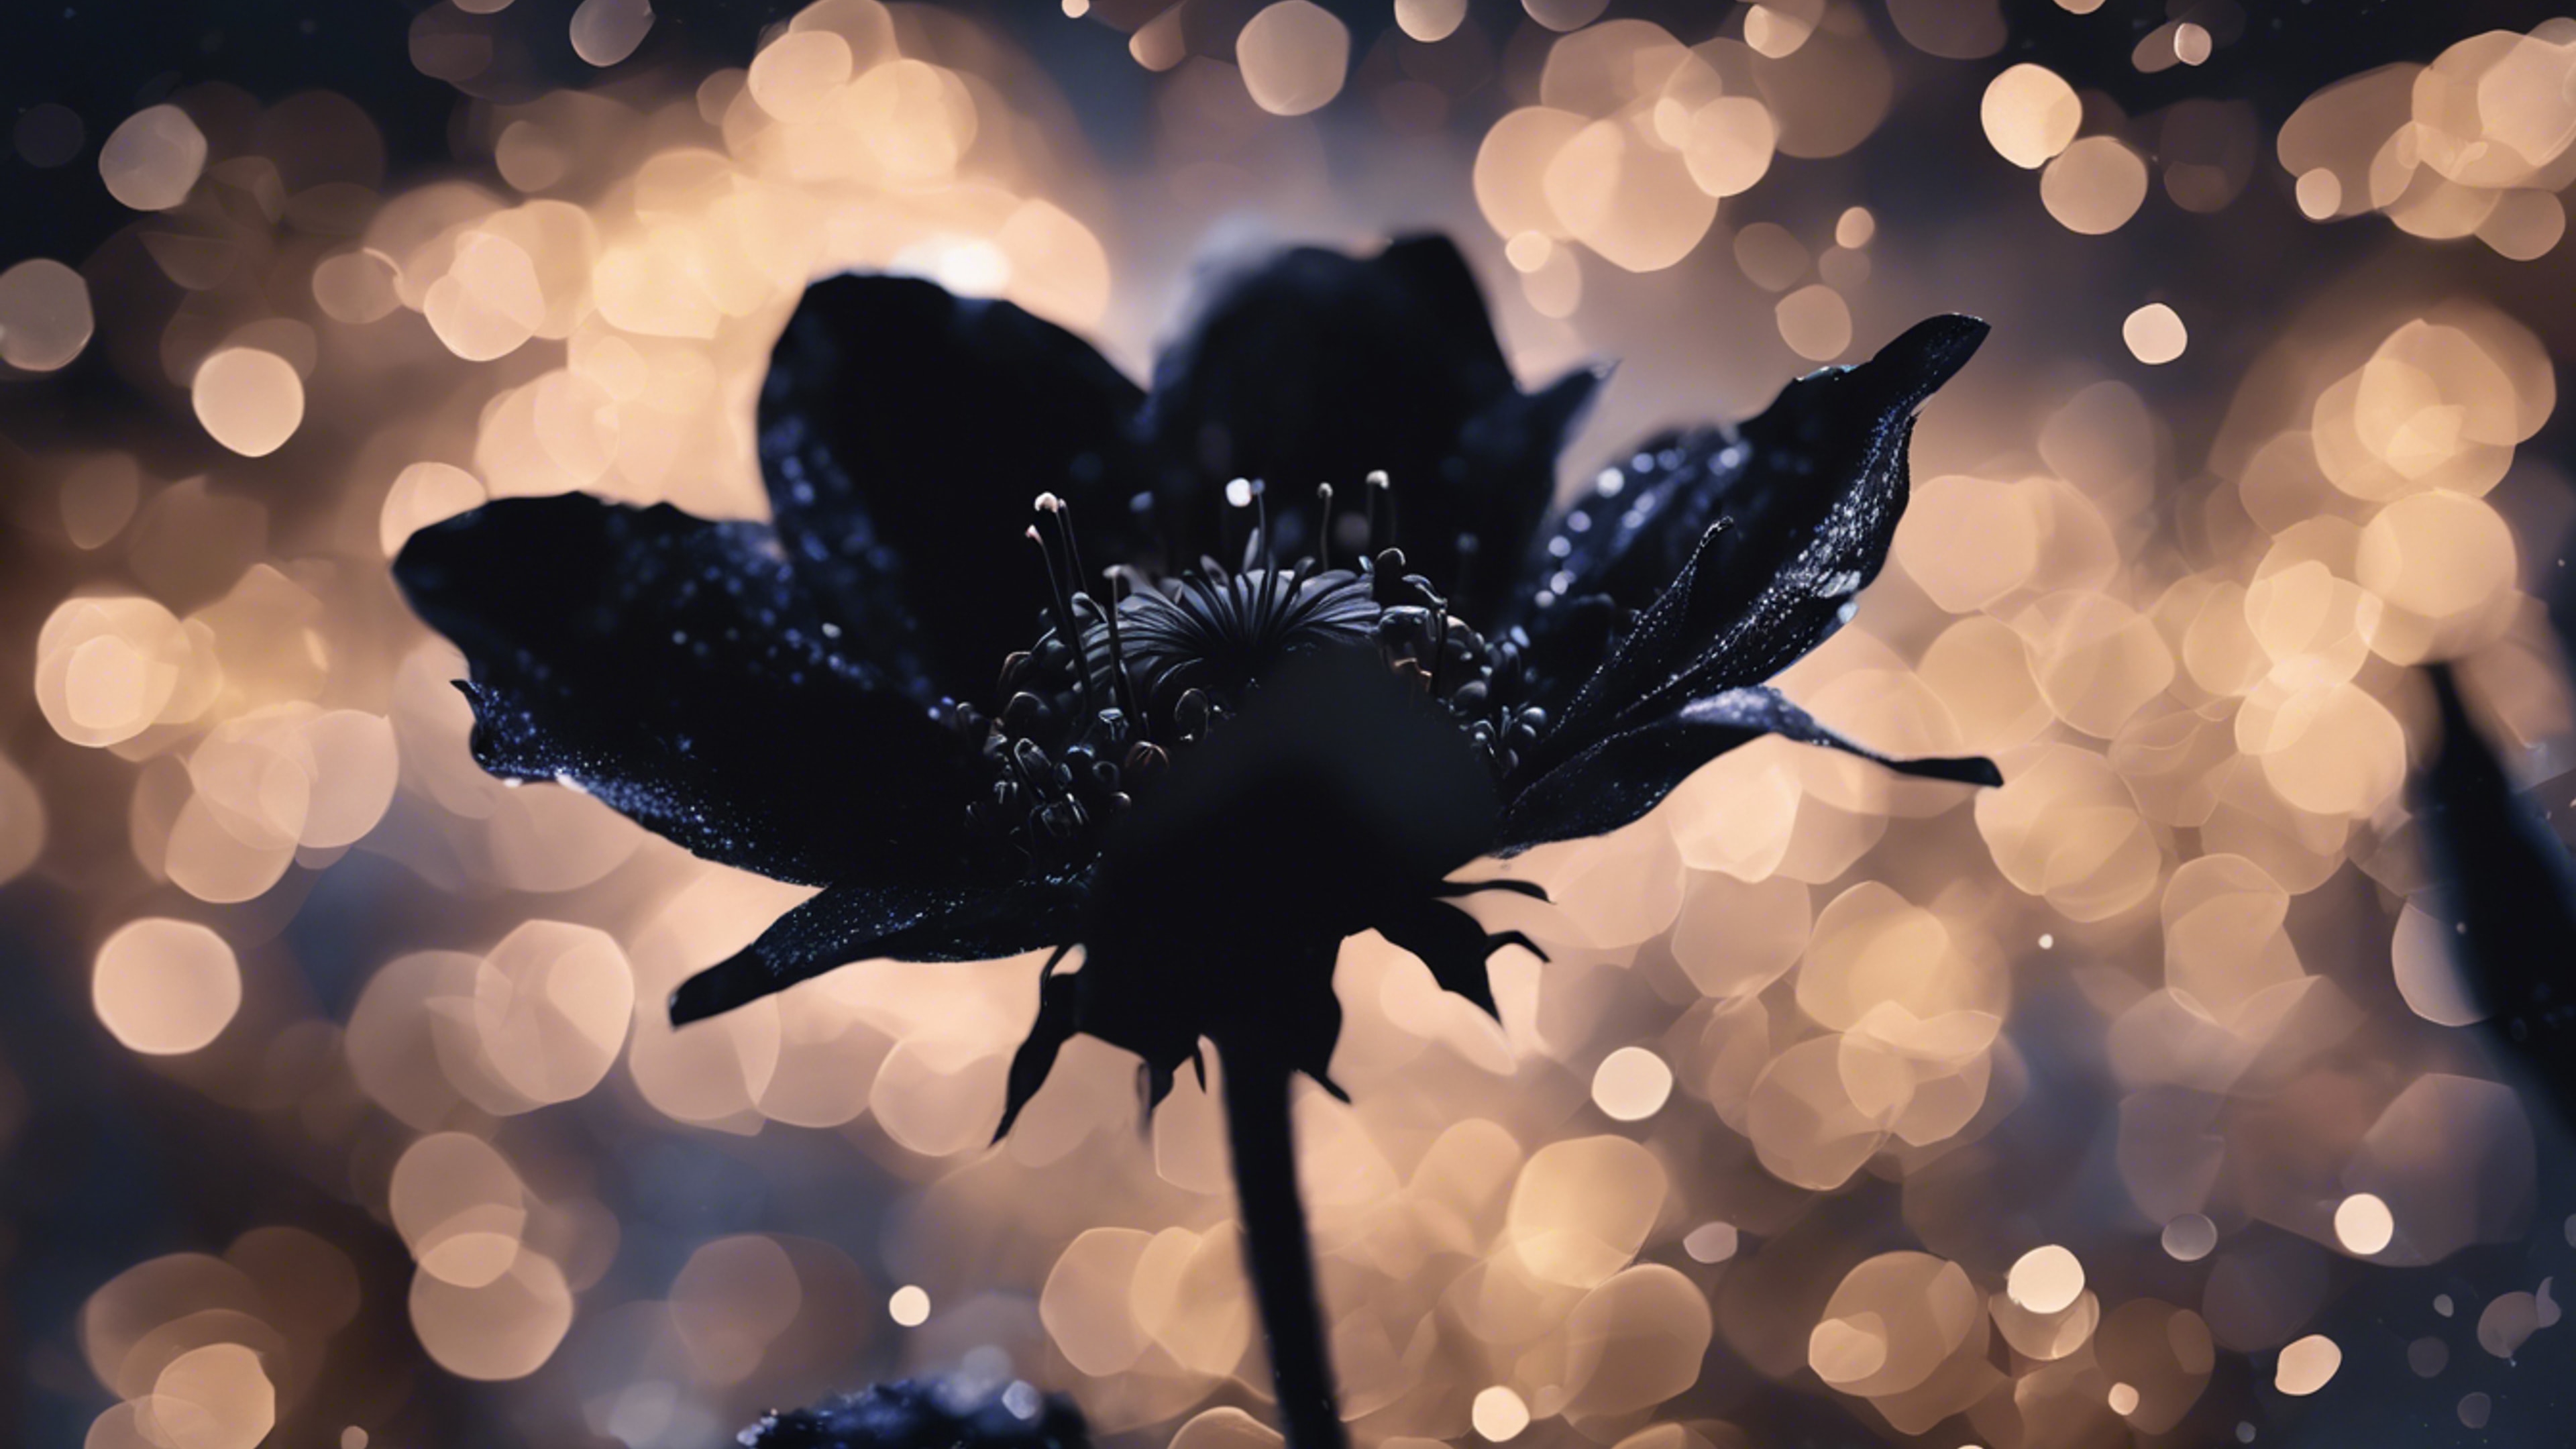 A silhouette of a night-blooming black flower, its petals slightly shimmering beneath a starlit sky.壁紙[42f6de17cdb14a3f8111]